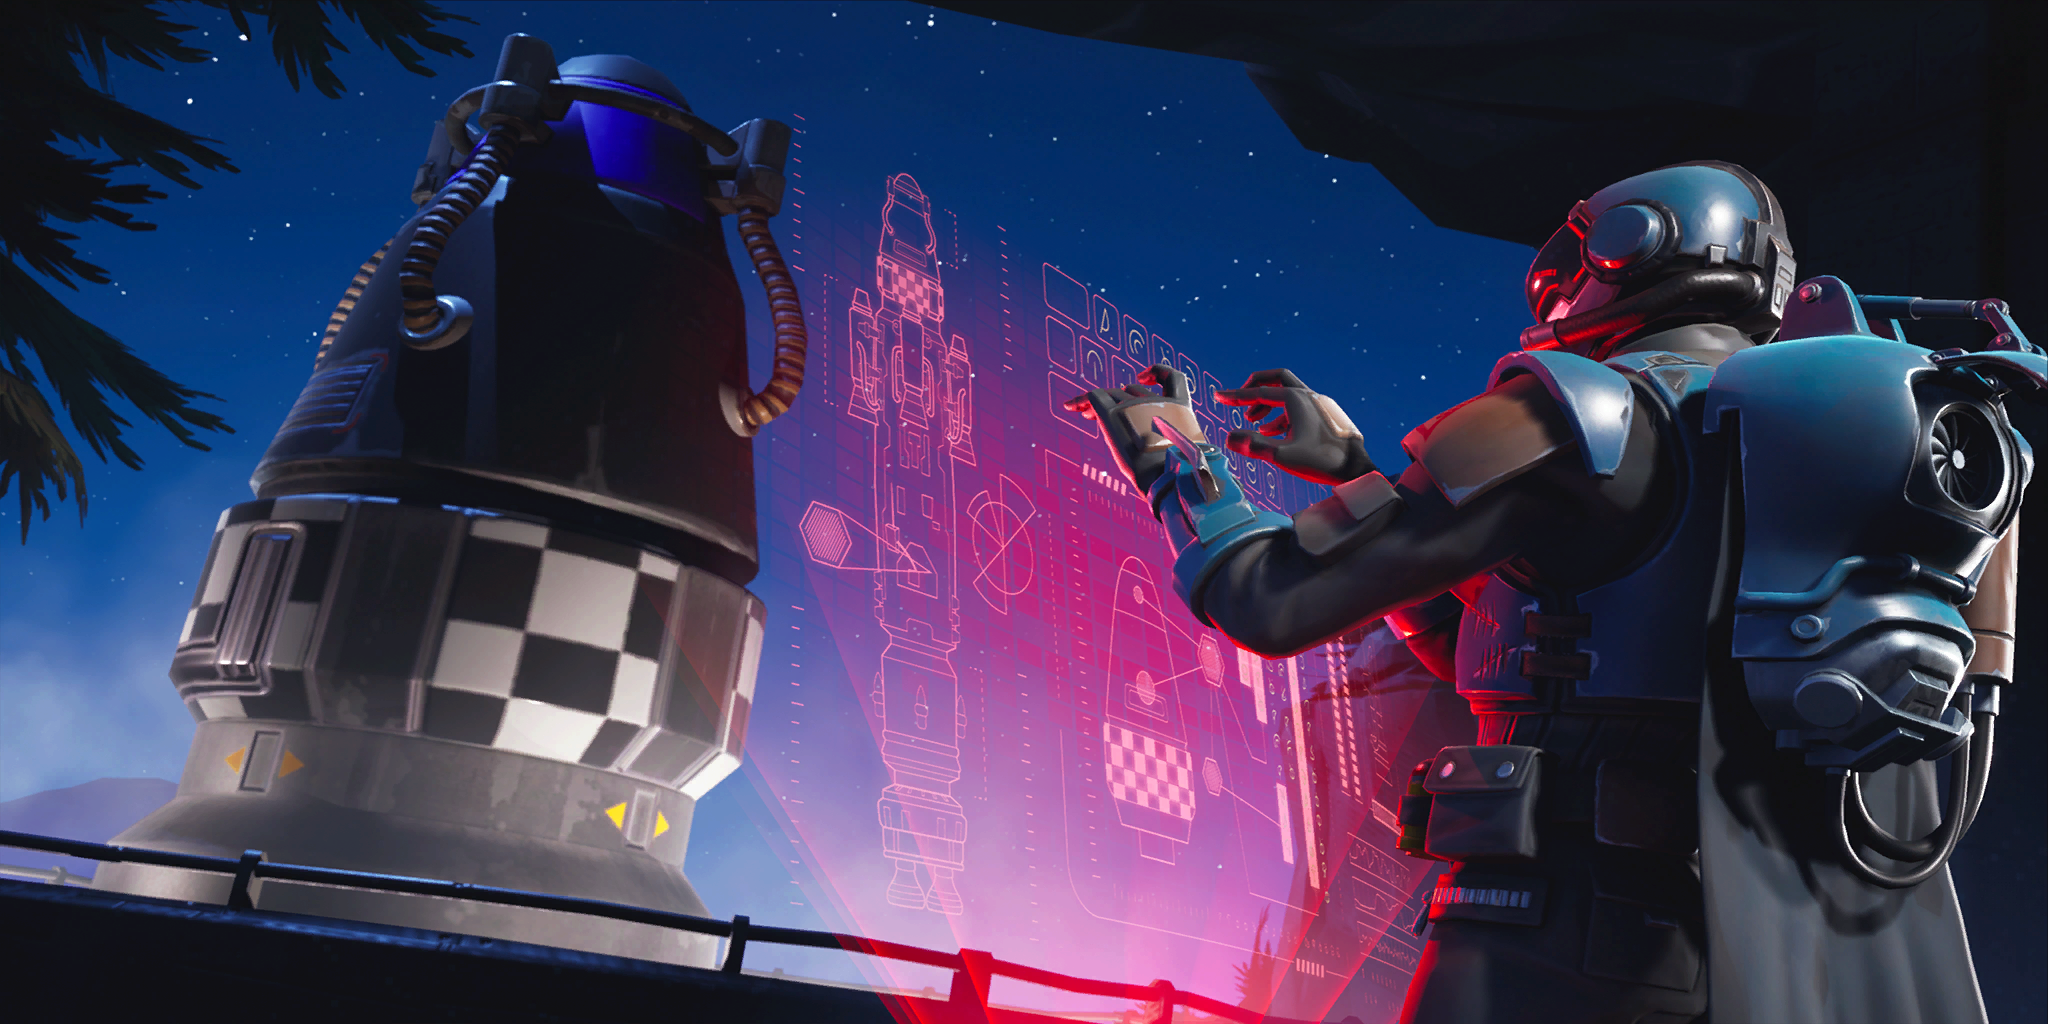 Fortnite Leaks: New Season X event details found in the game files